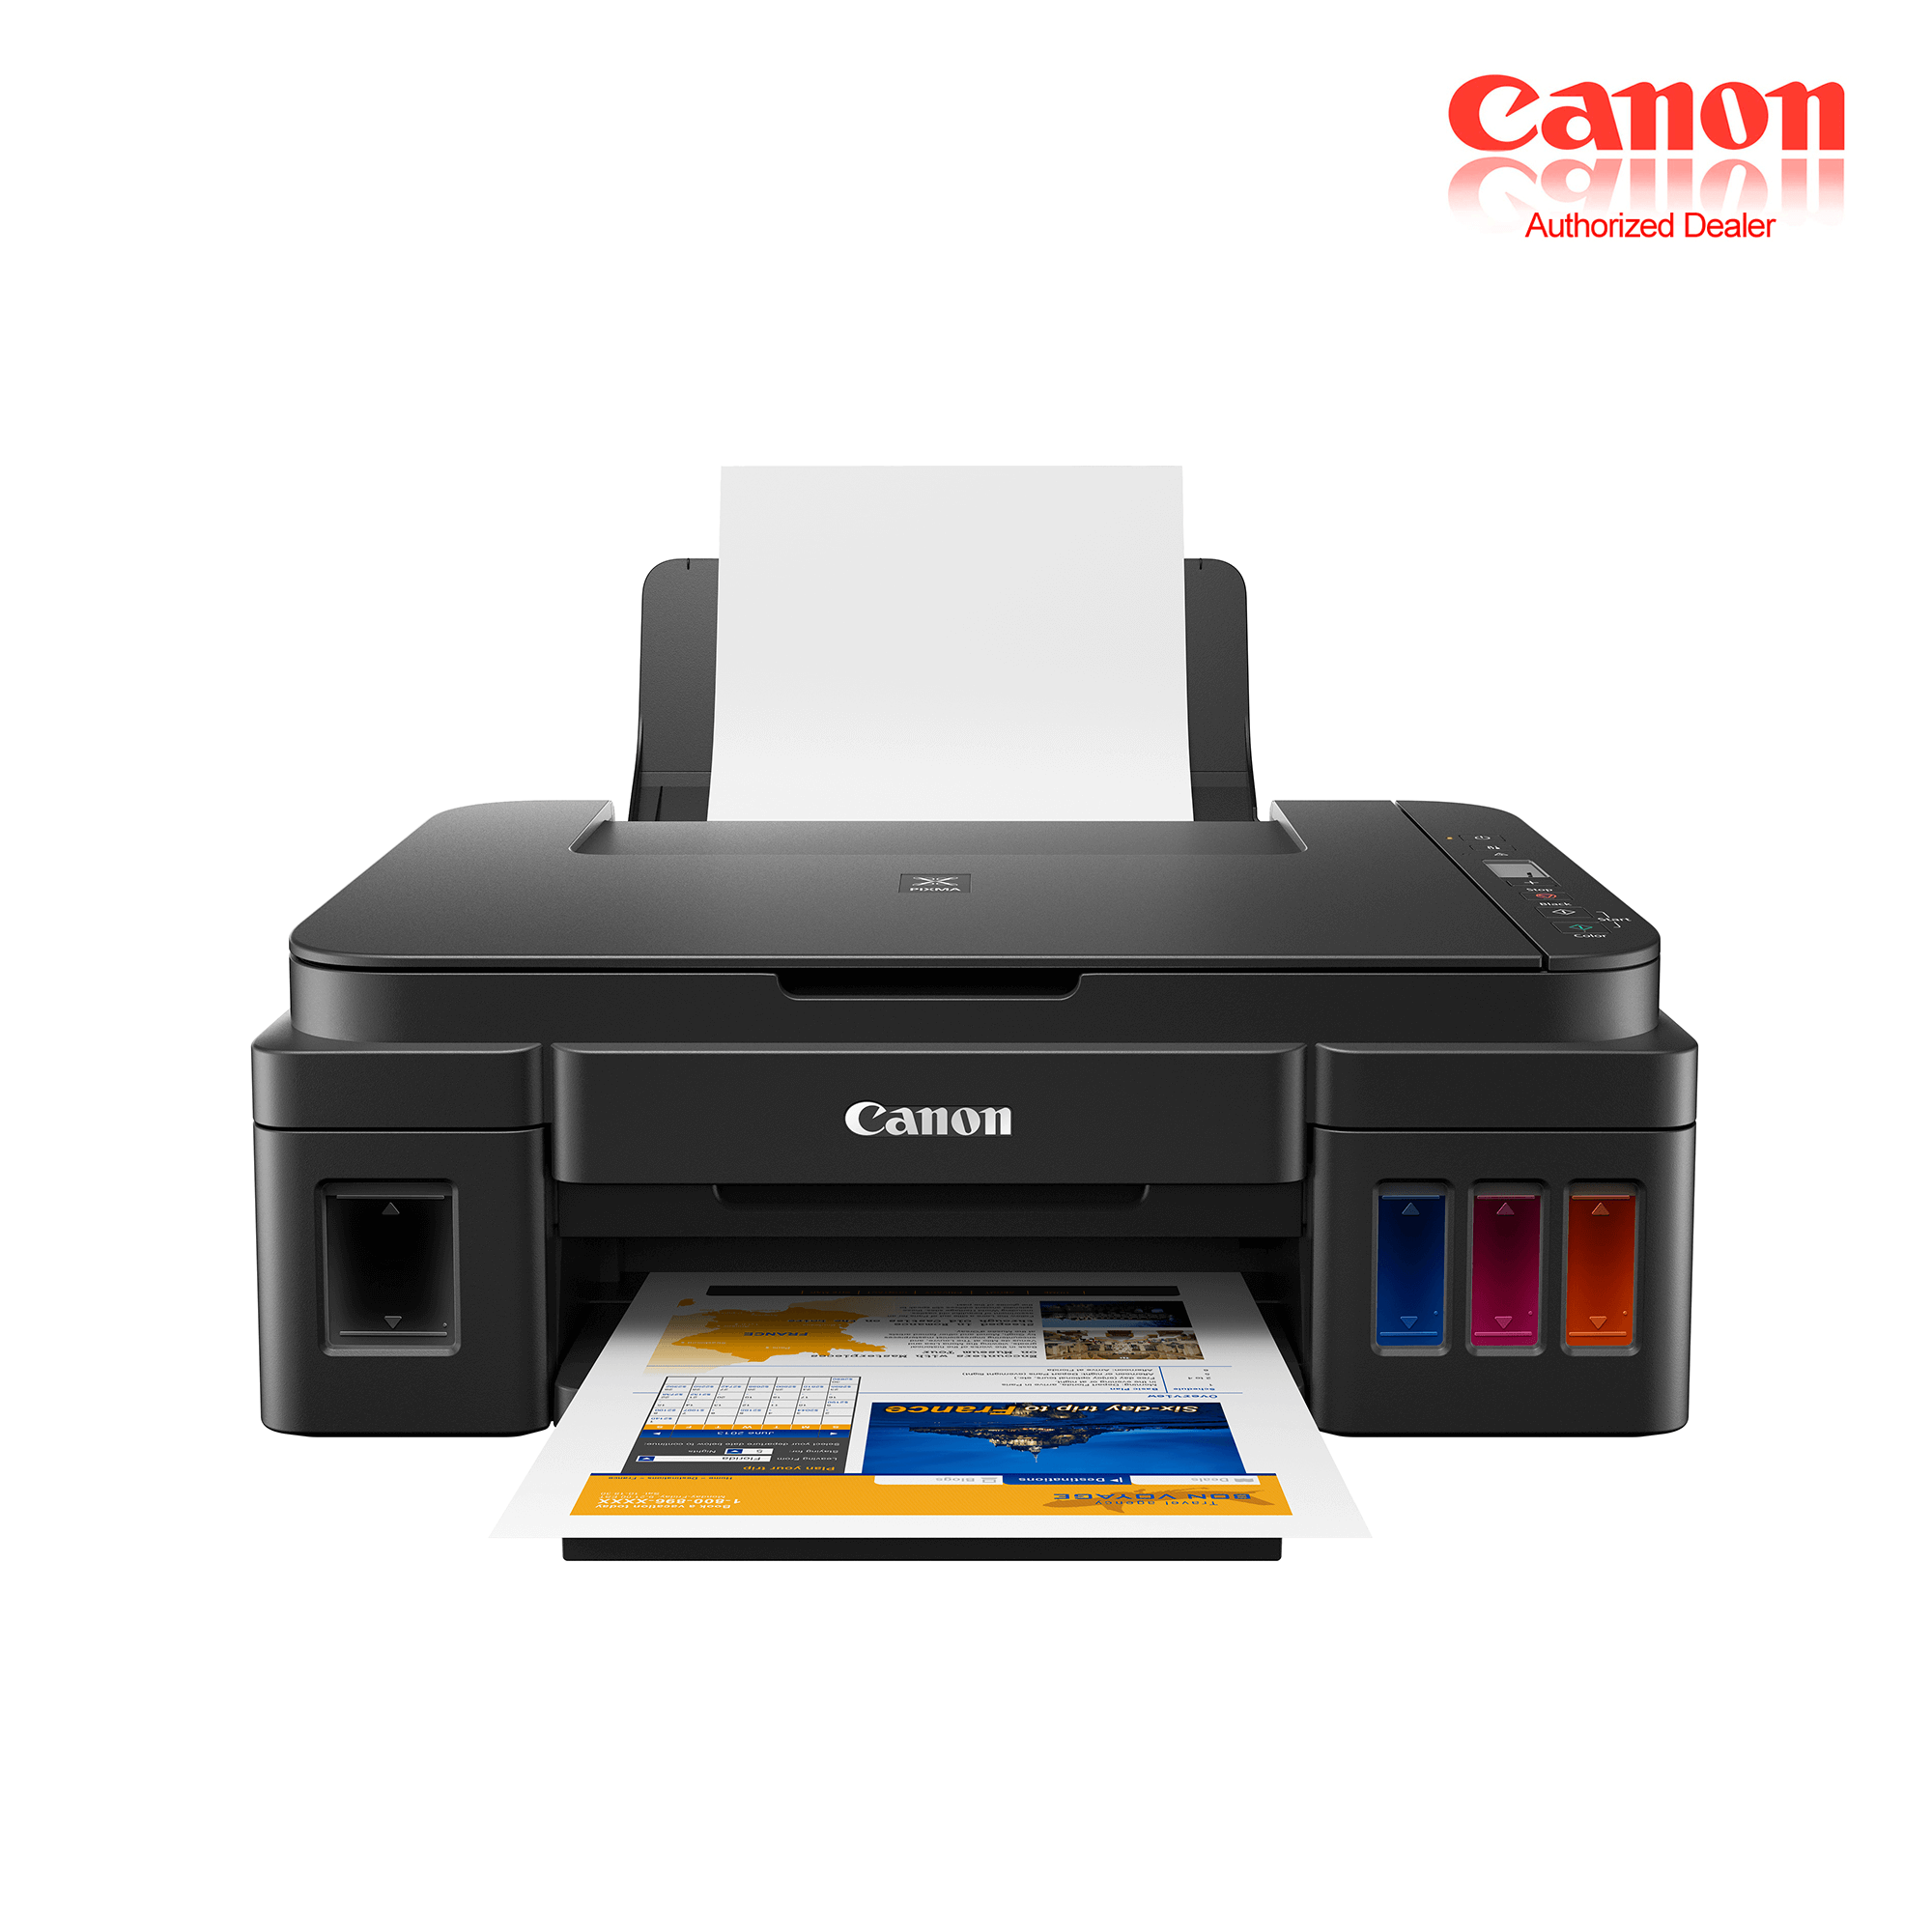 Canon PIXMA G2010 Ink Tank All In One Printer